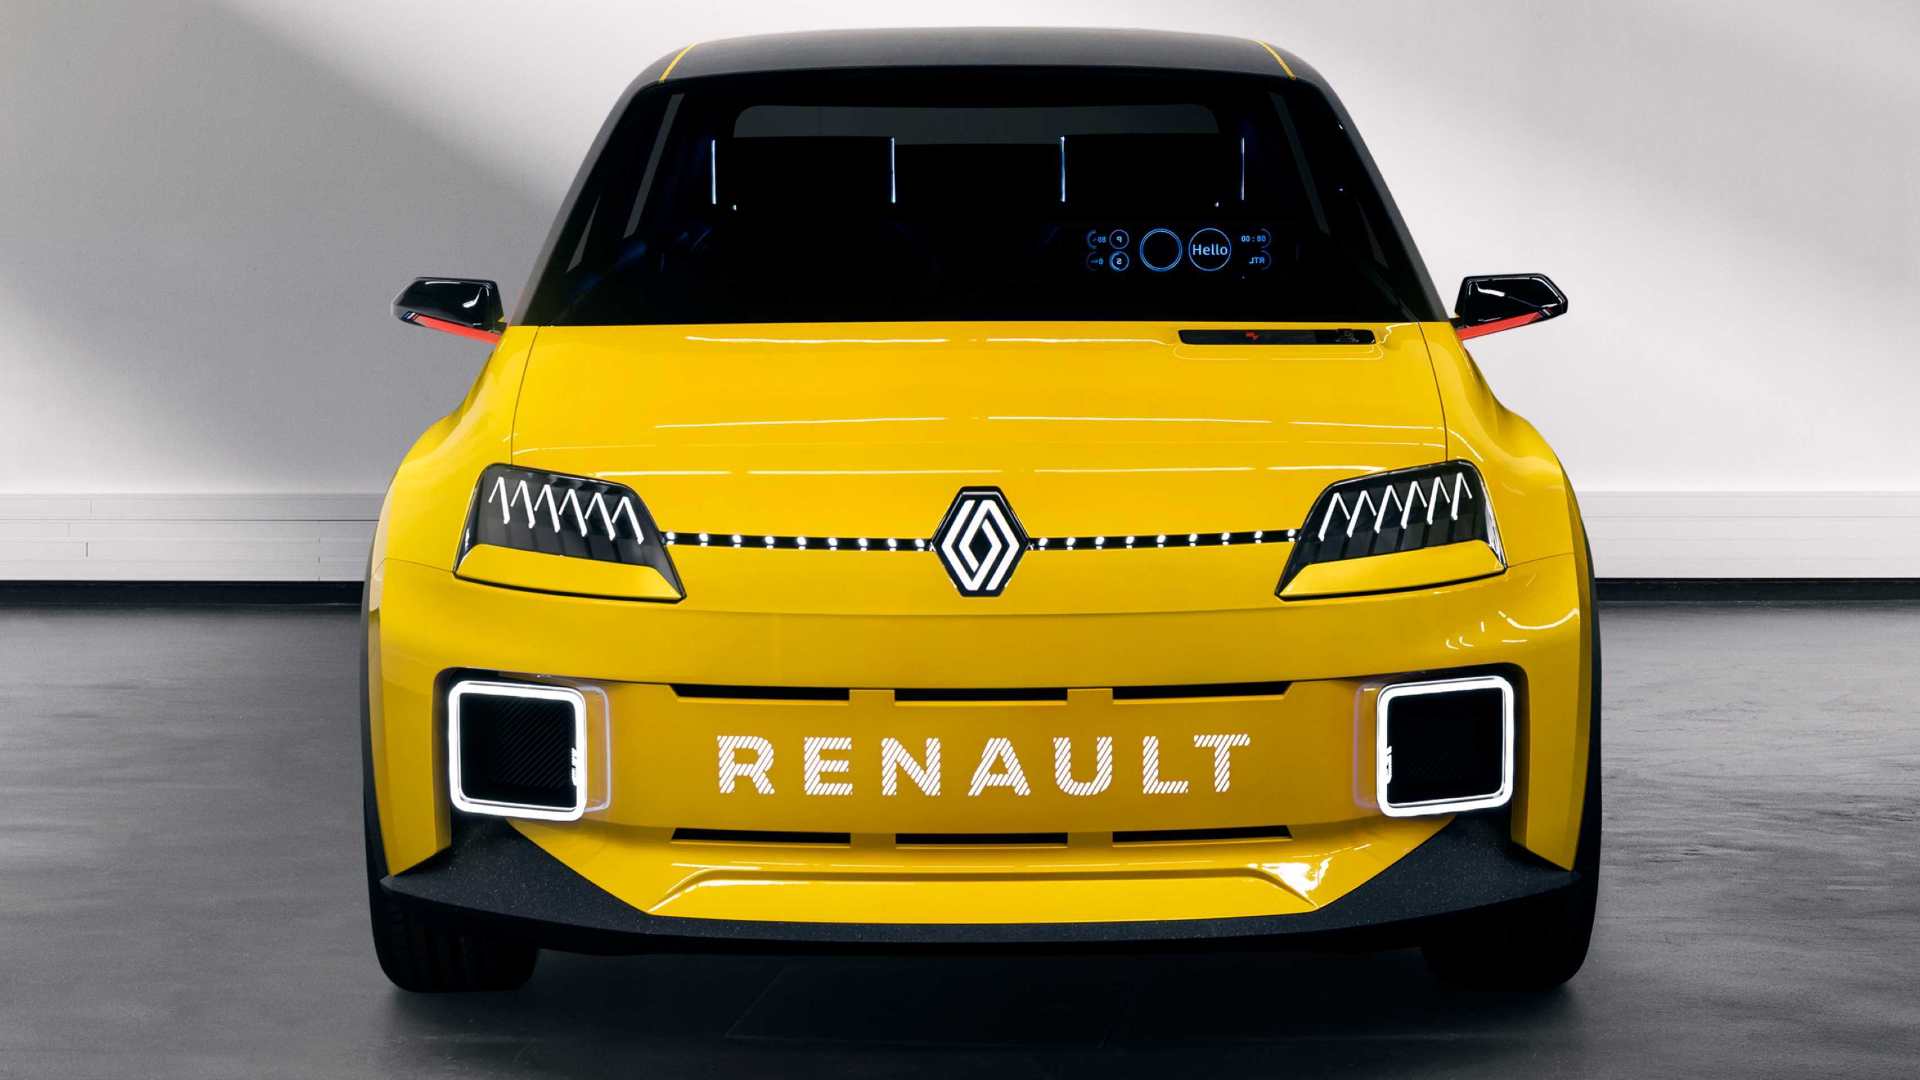 Future Renault models will feature the 'Safety Coach', which will warn drivers of potential risks and provide real-time warnings. Image: Renault